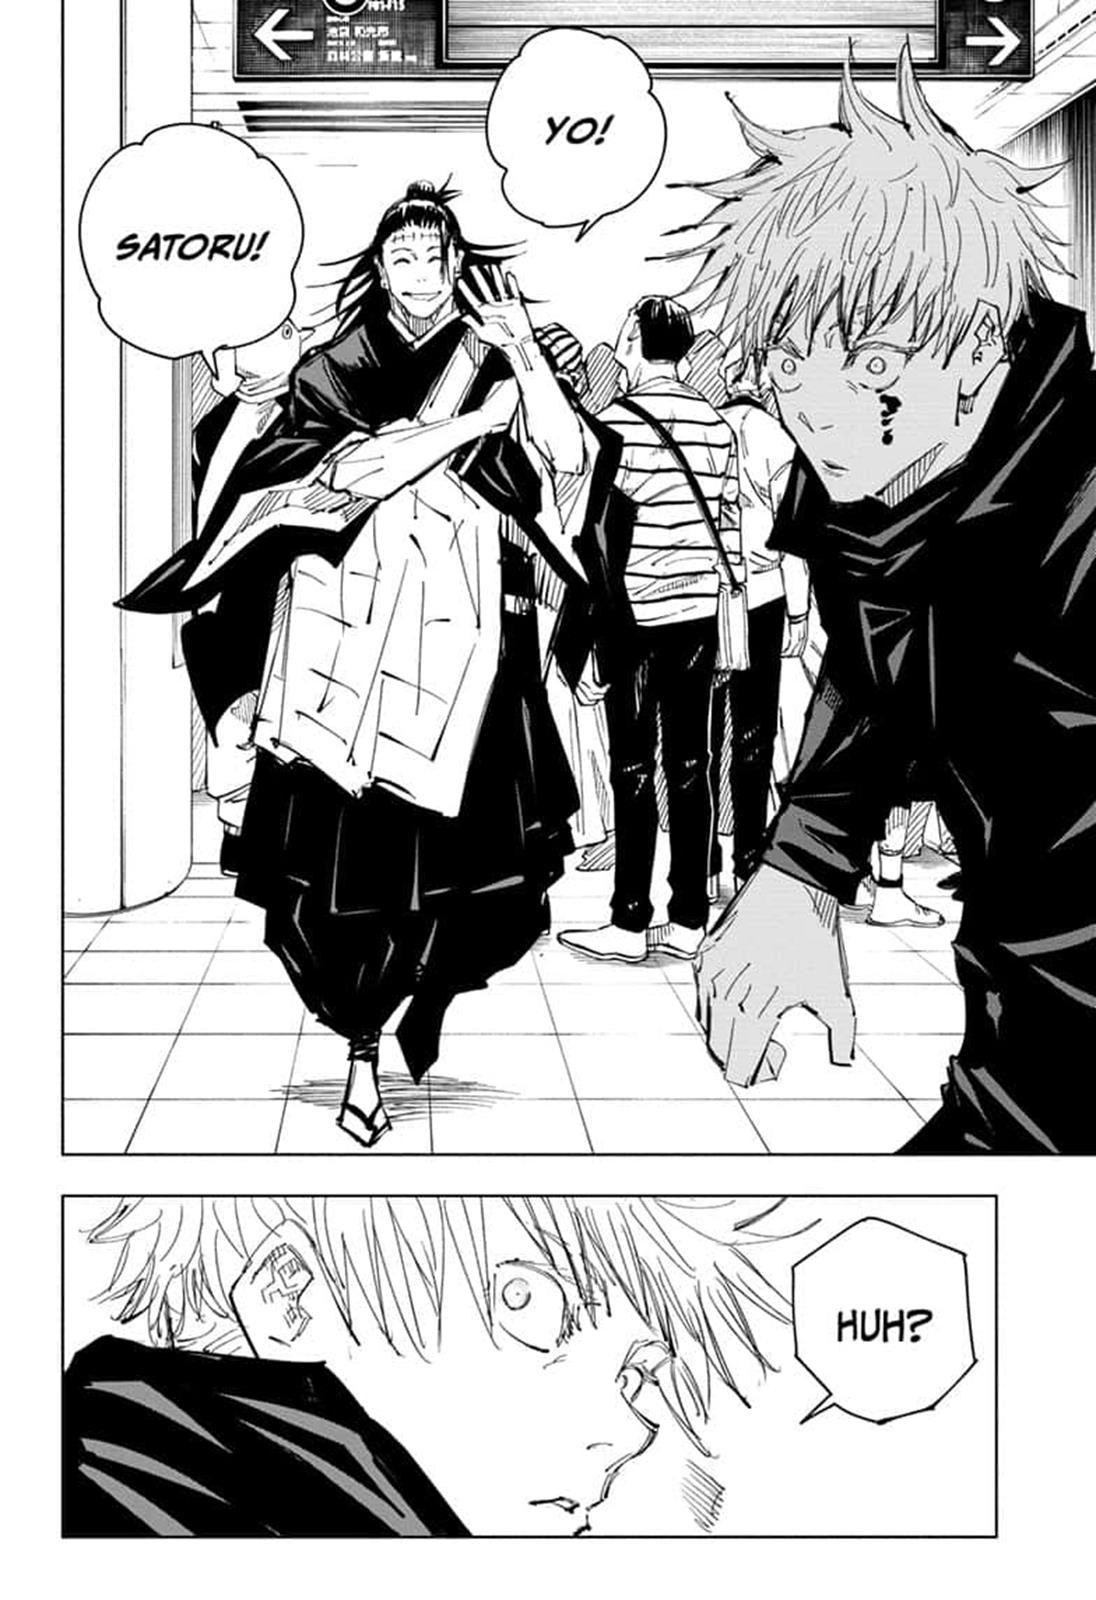 dont read jujutsu kaisen — having your loved ones as enemies; he knows  your